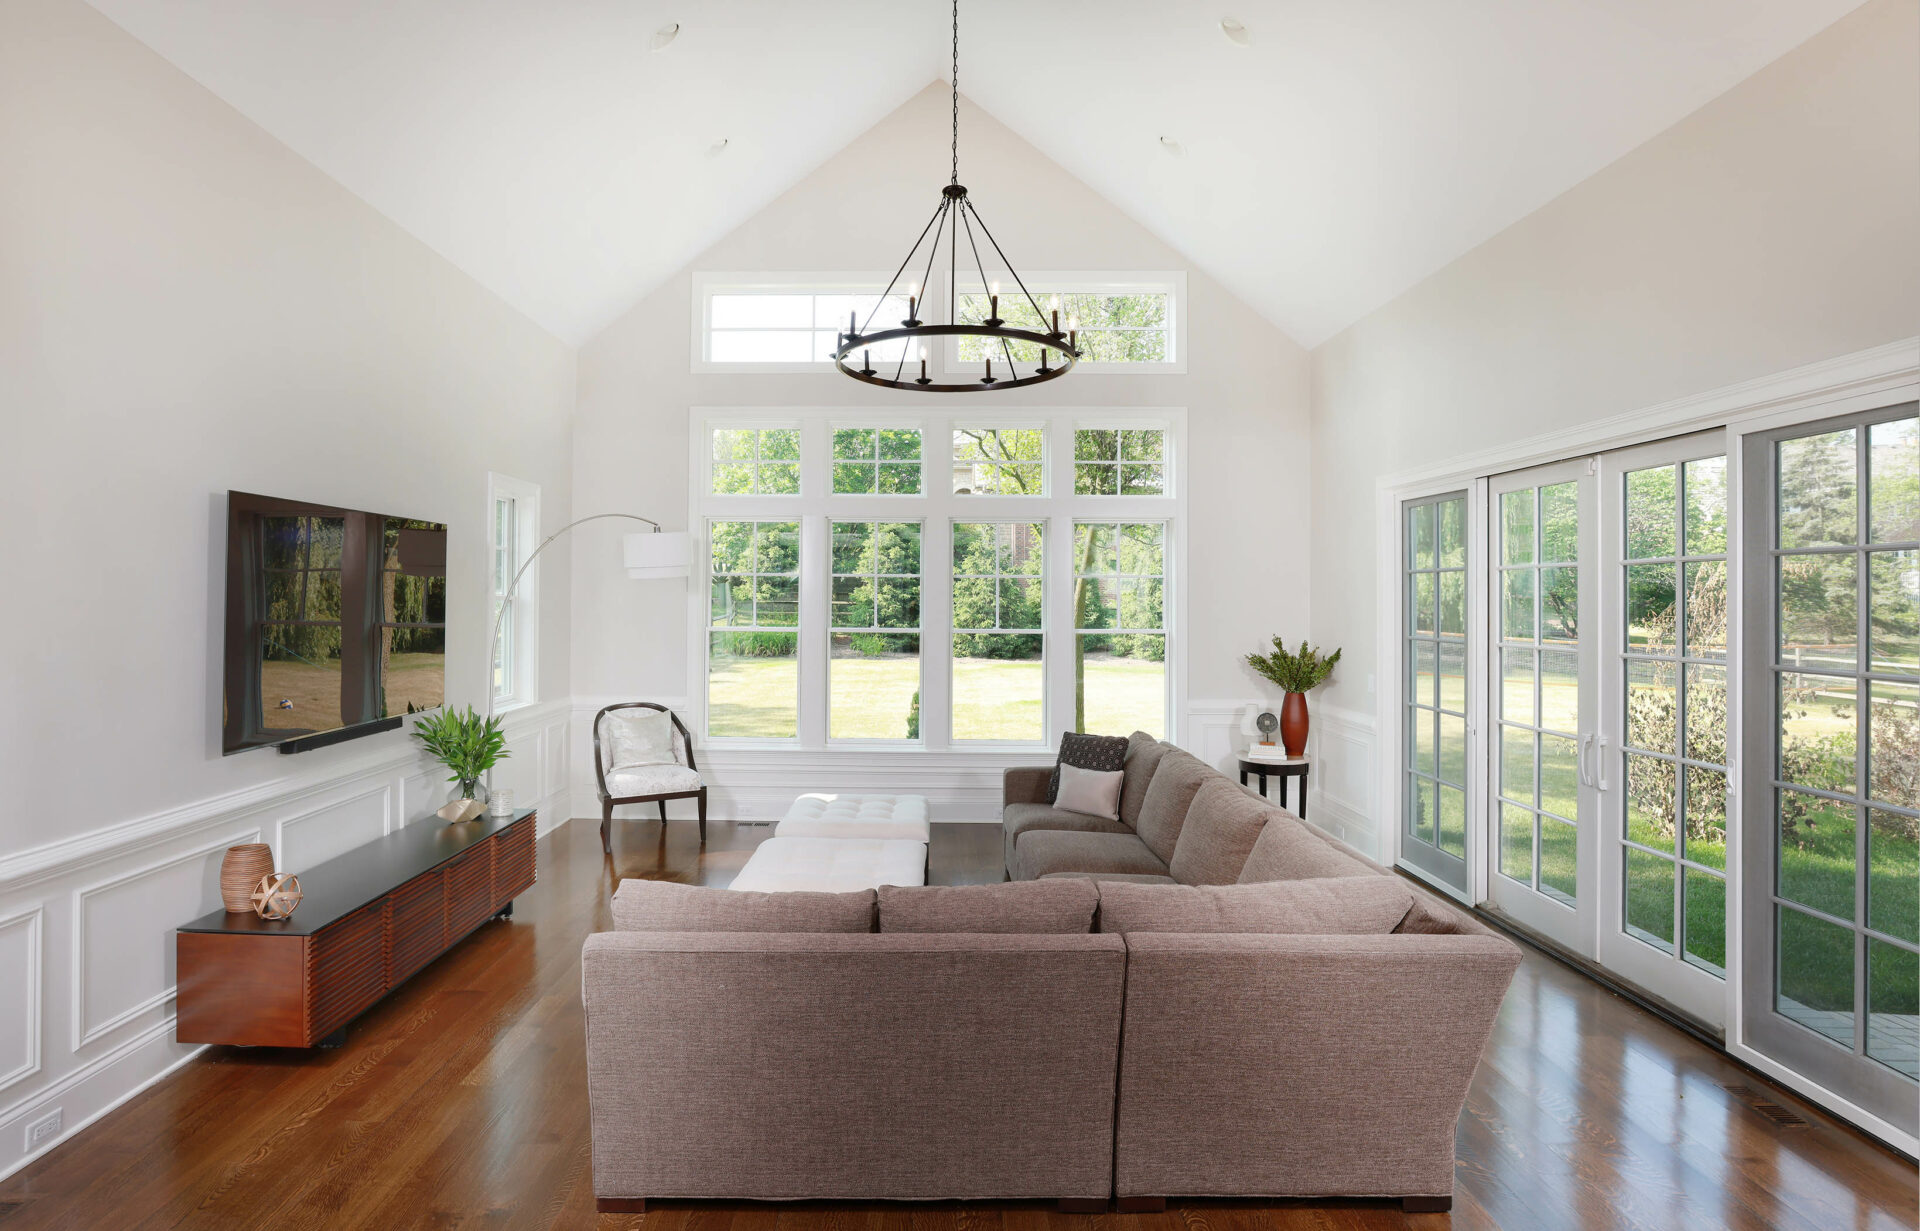 interior view of a family room addition with a vaulted ceiling